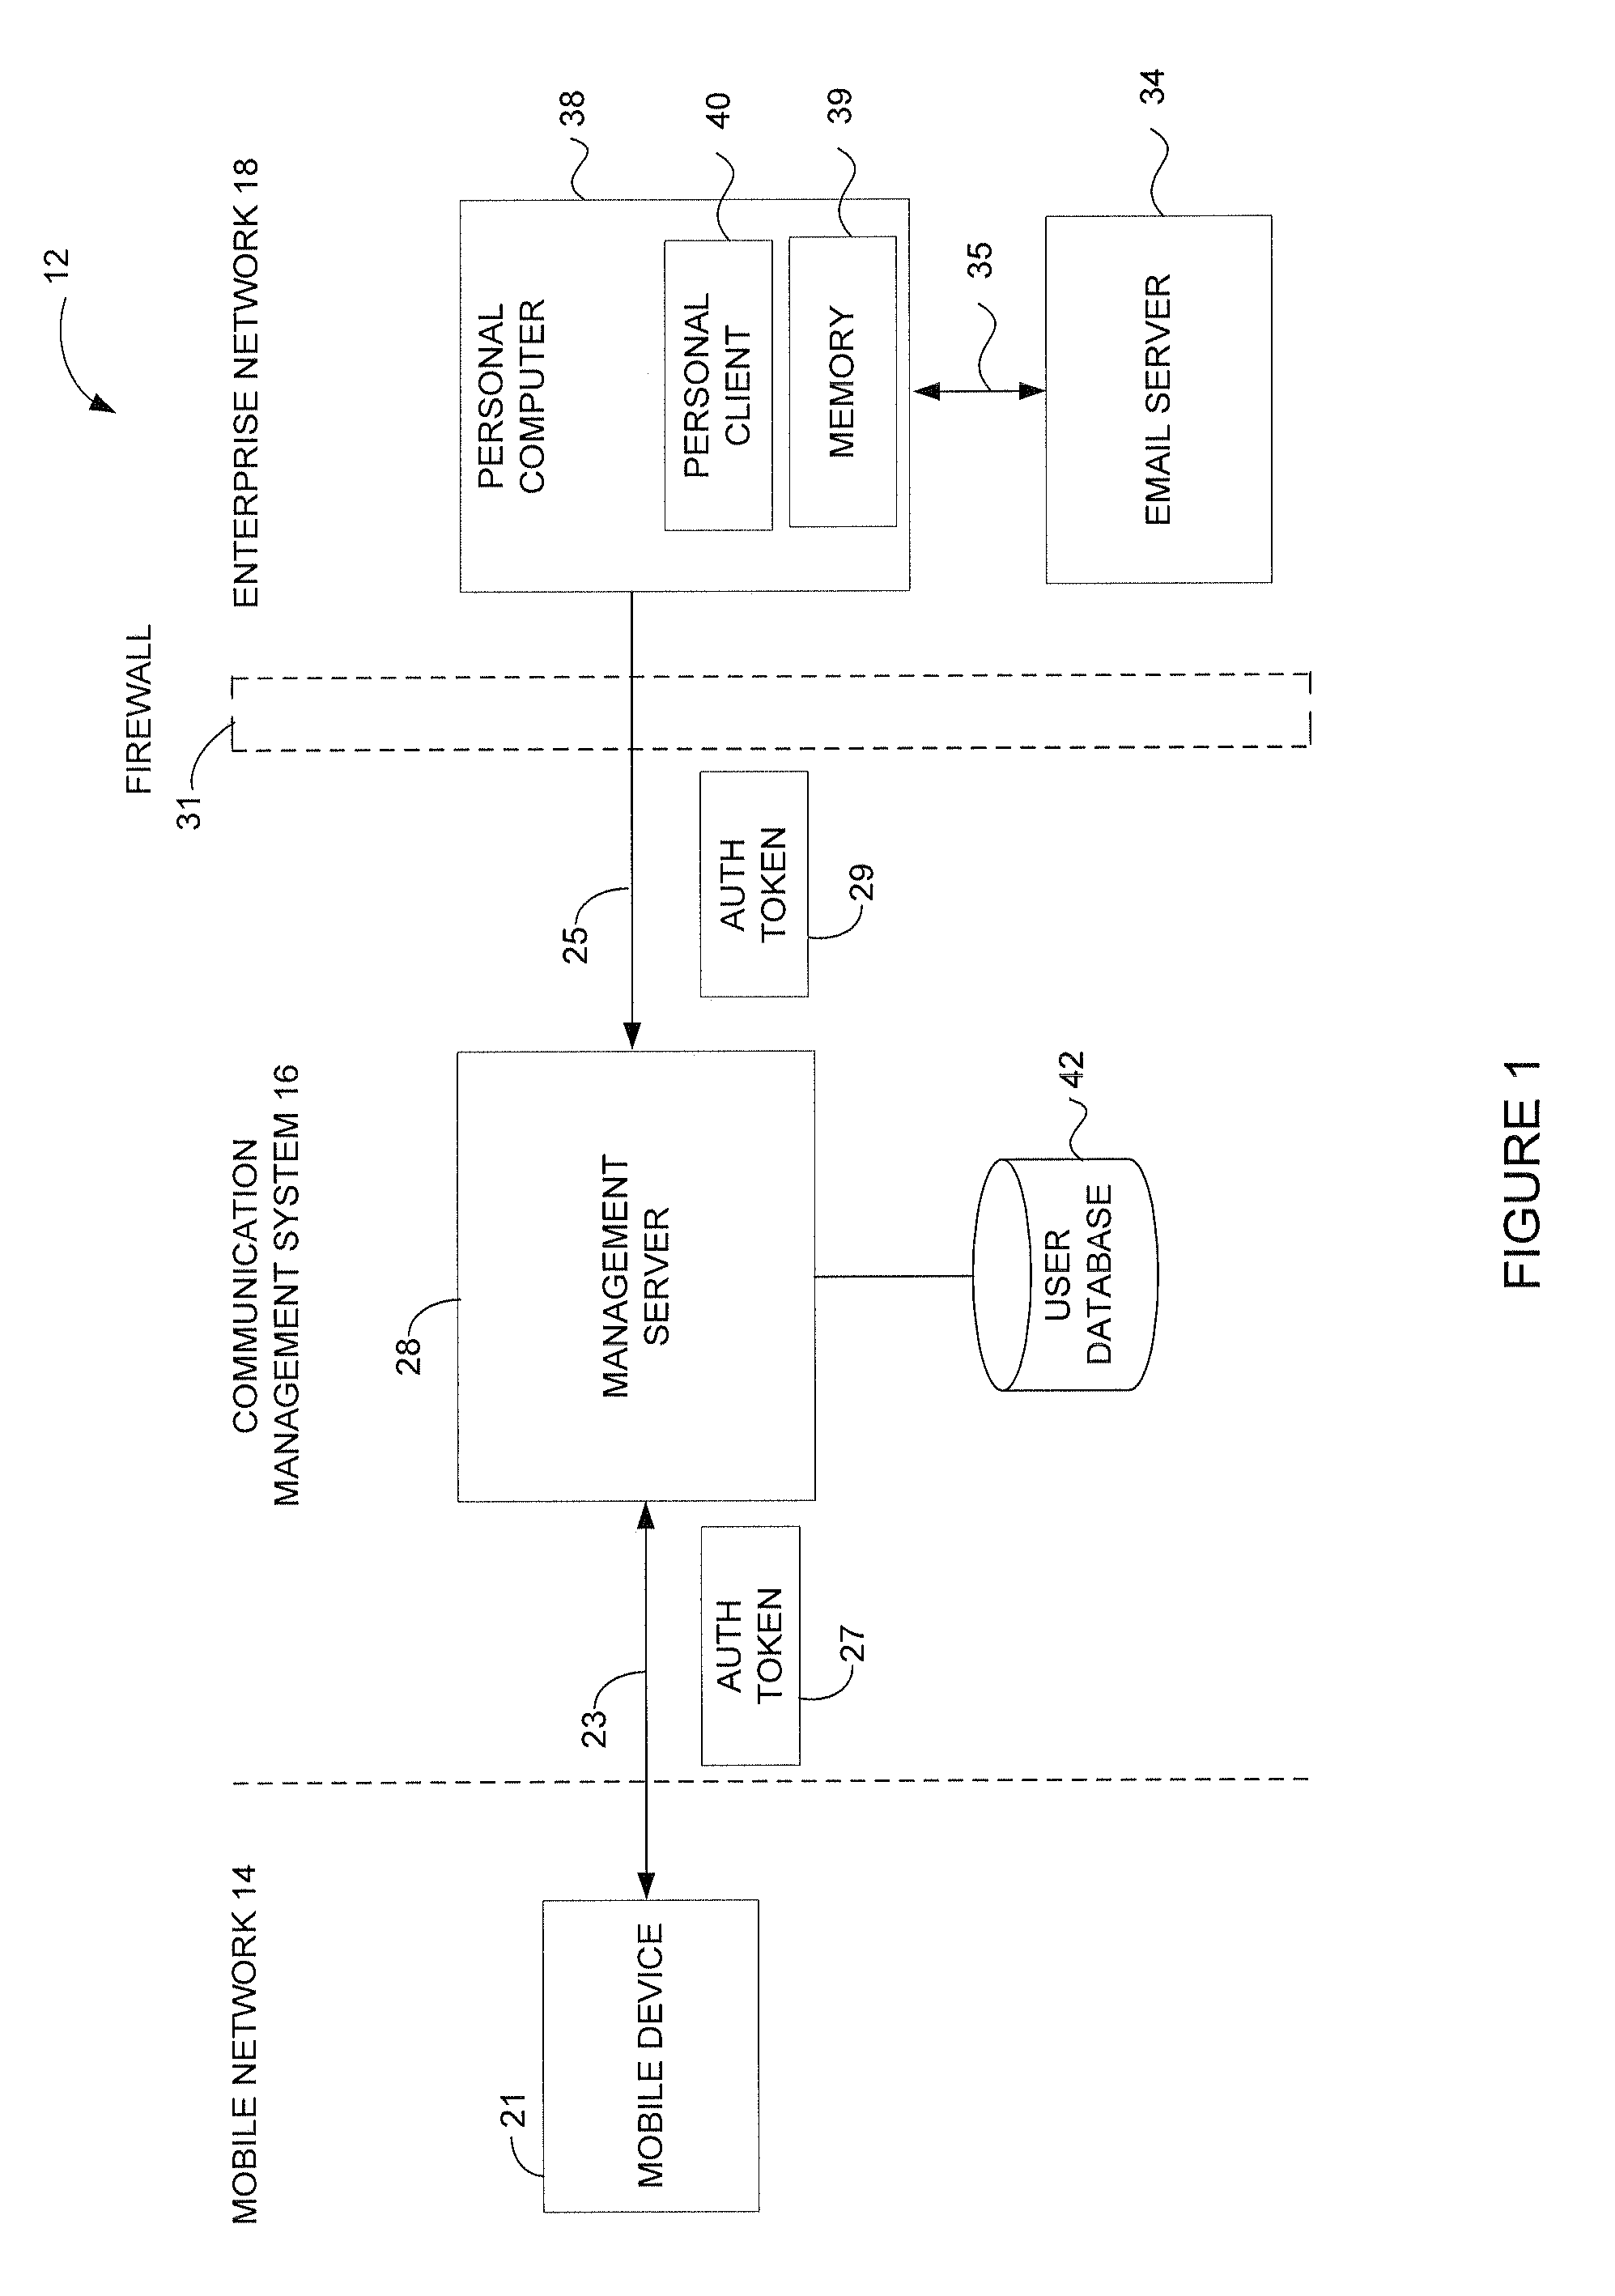 Connection architecture for a mobile network